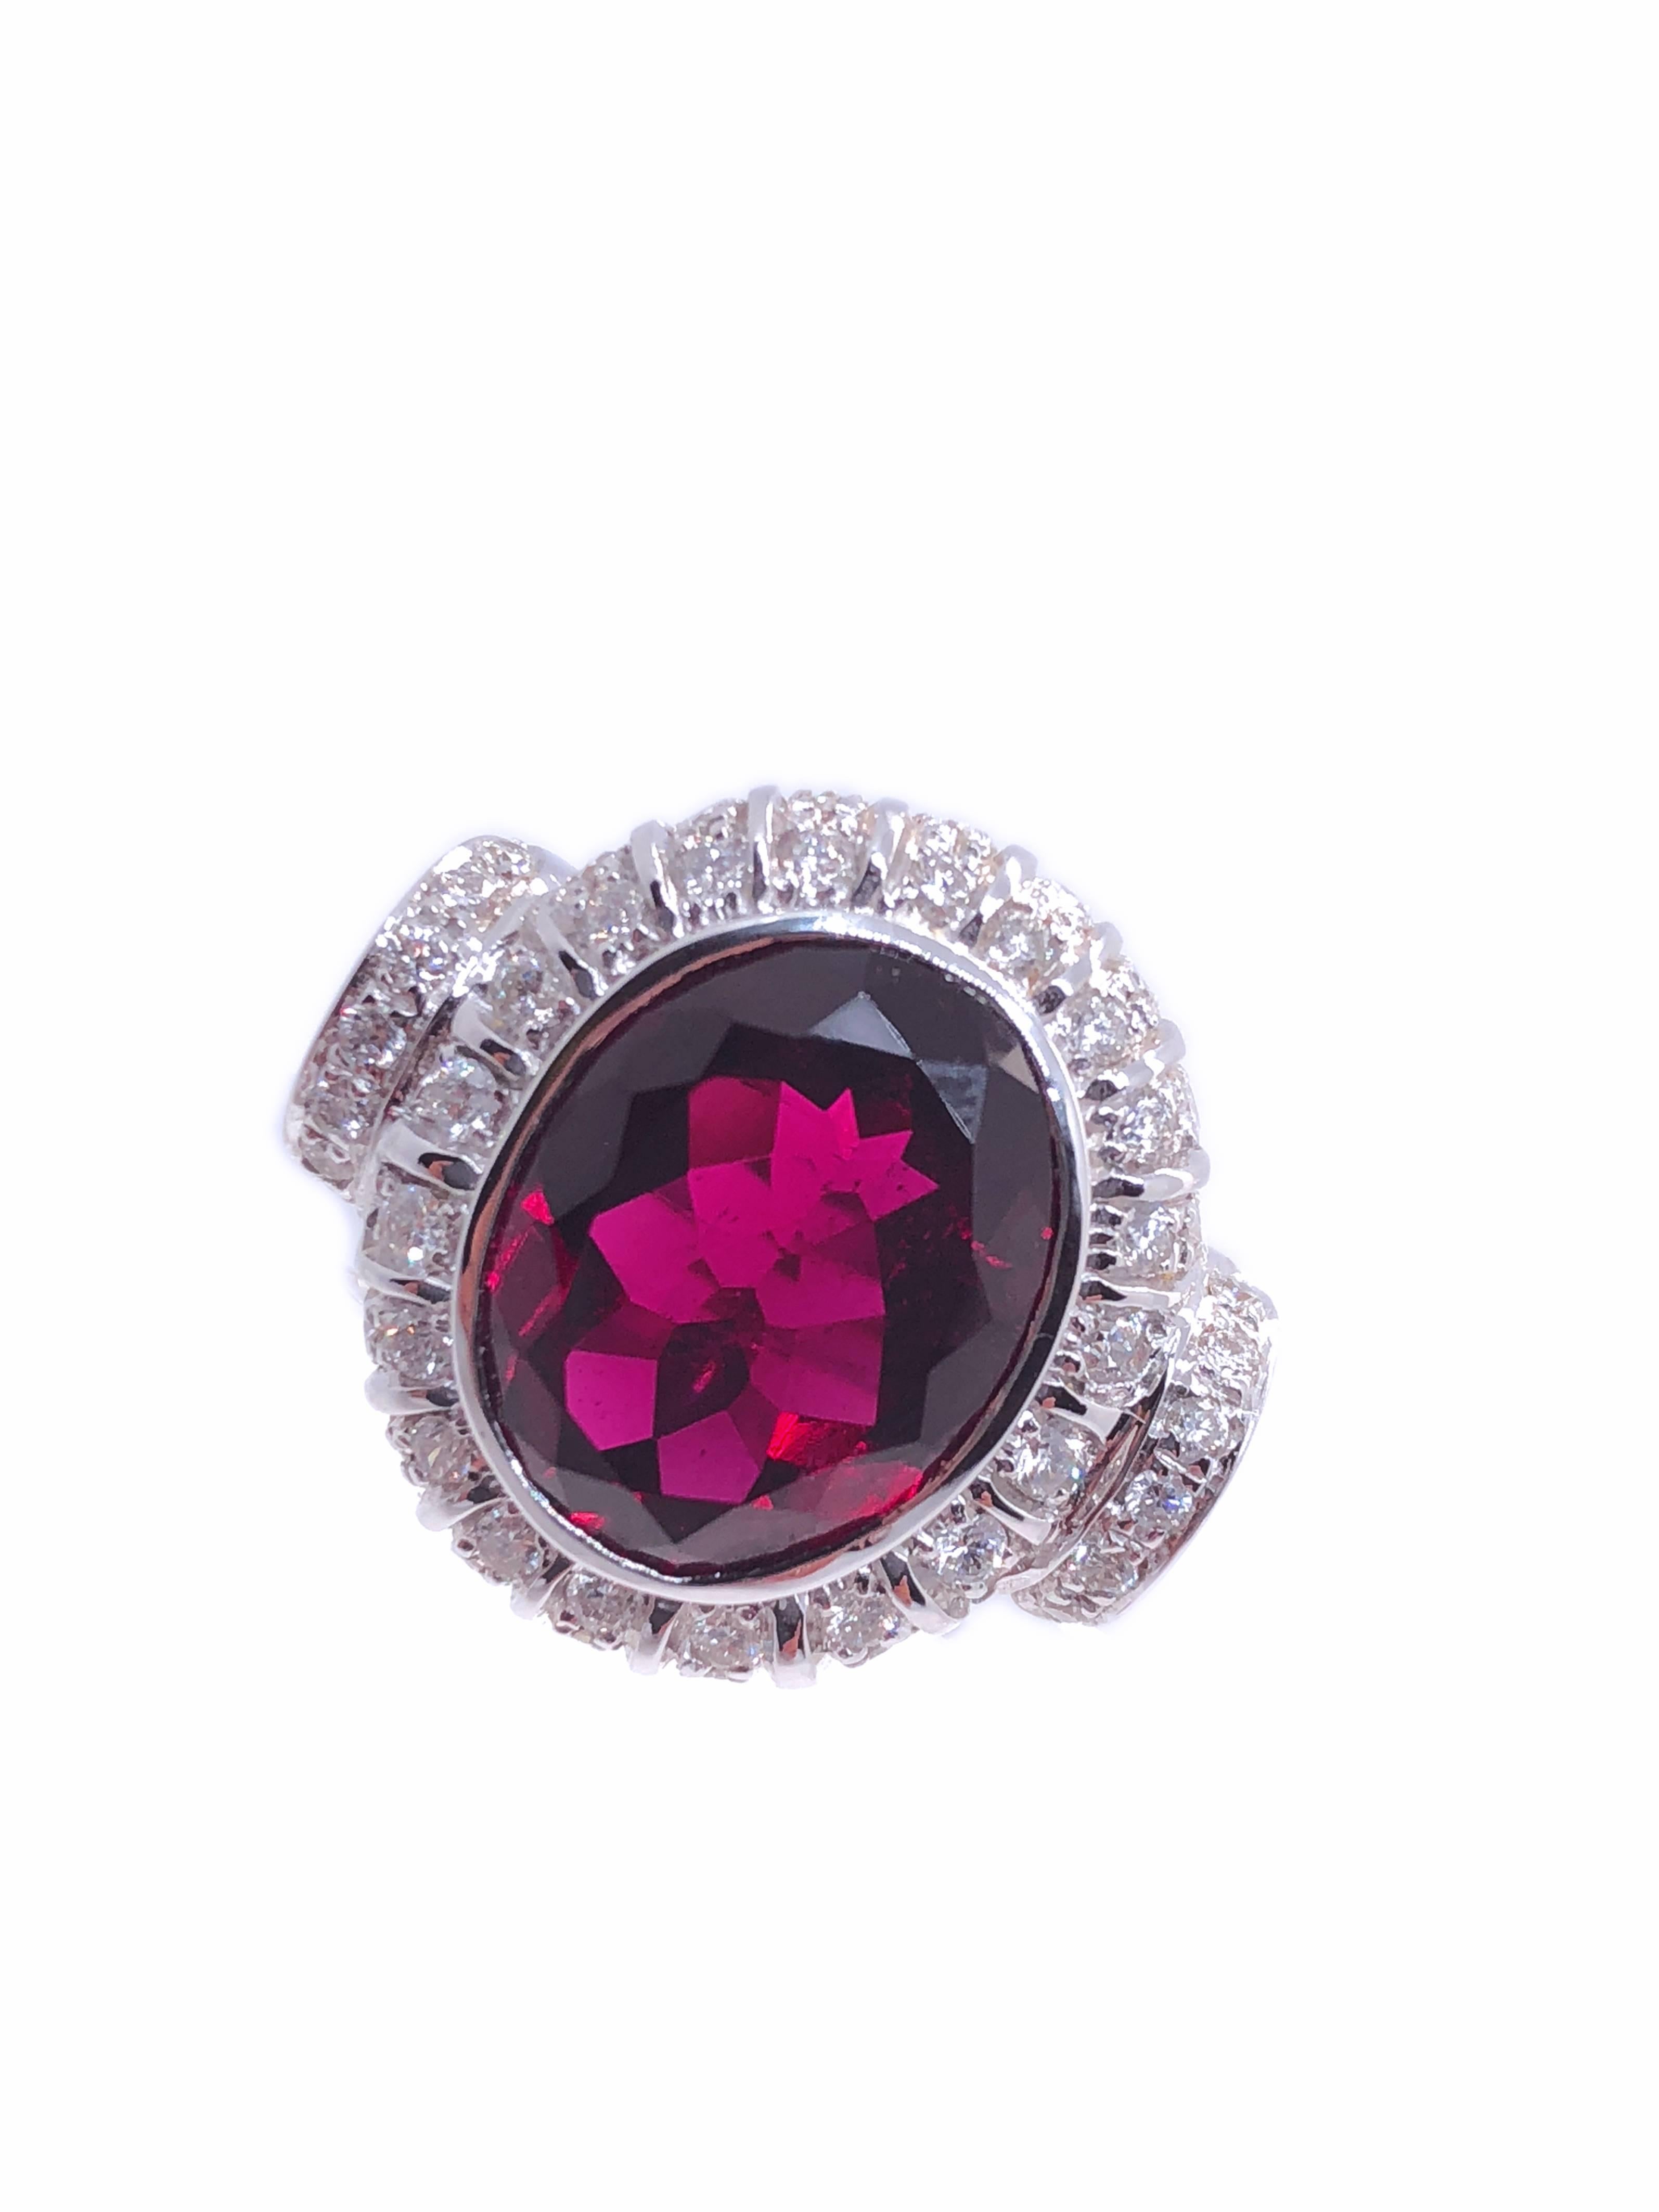 Oval Cut 8.81 Carat Natural Red Tourmaline White Diamond Cocktail Ring